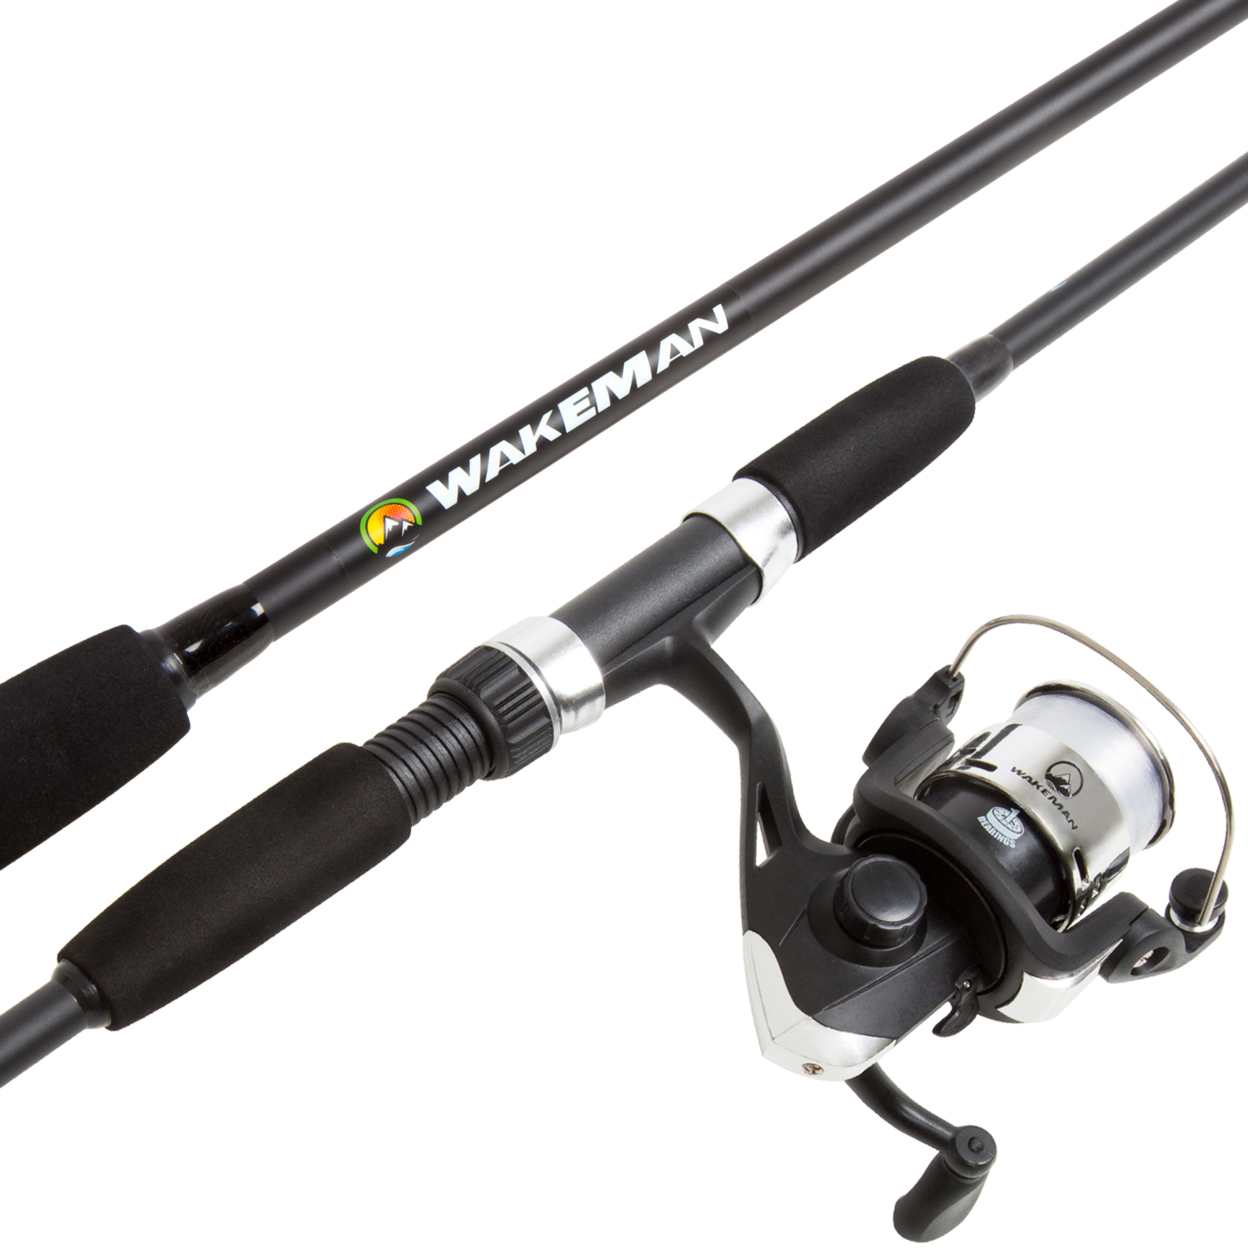 Wakeman Swarm Series Spinning Rod And Reel Combo - Blackout